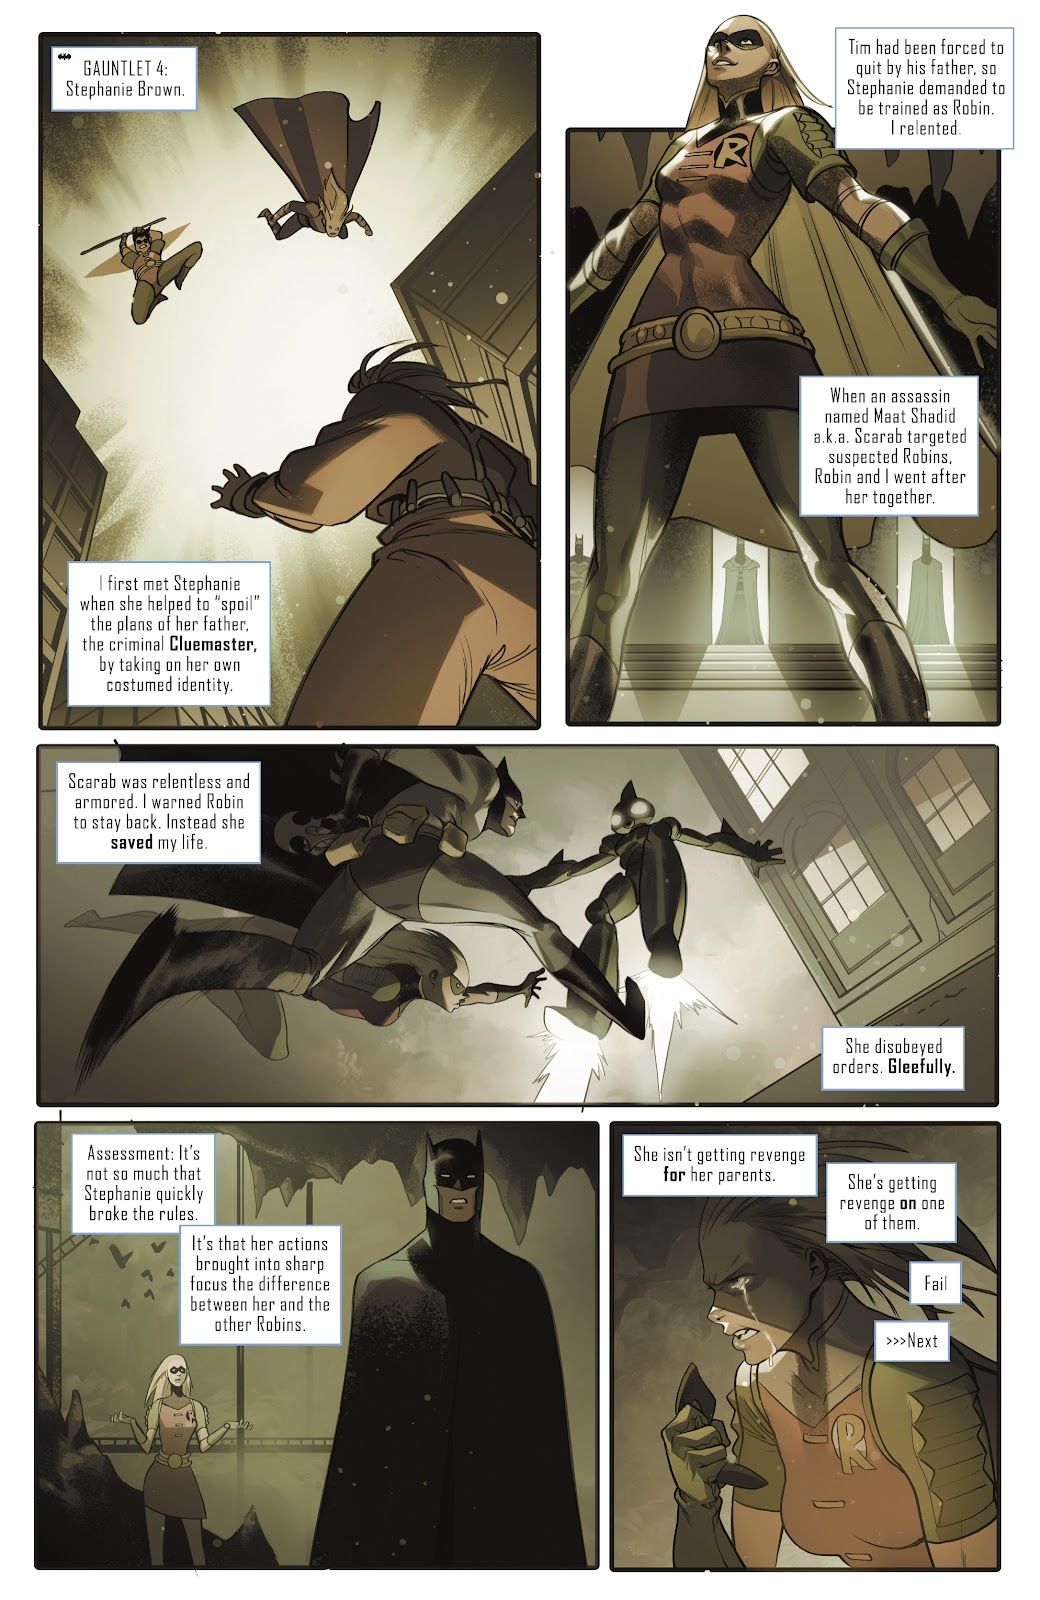 Batman Reveals How He Tests Robins (And Why One Failed)